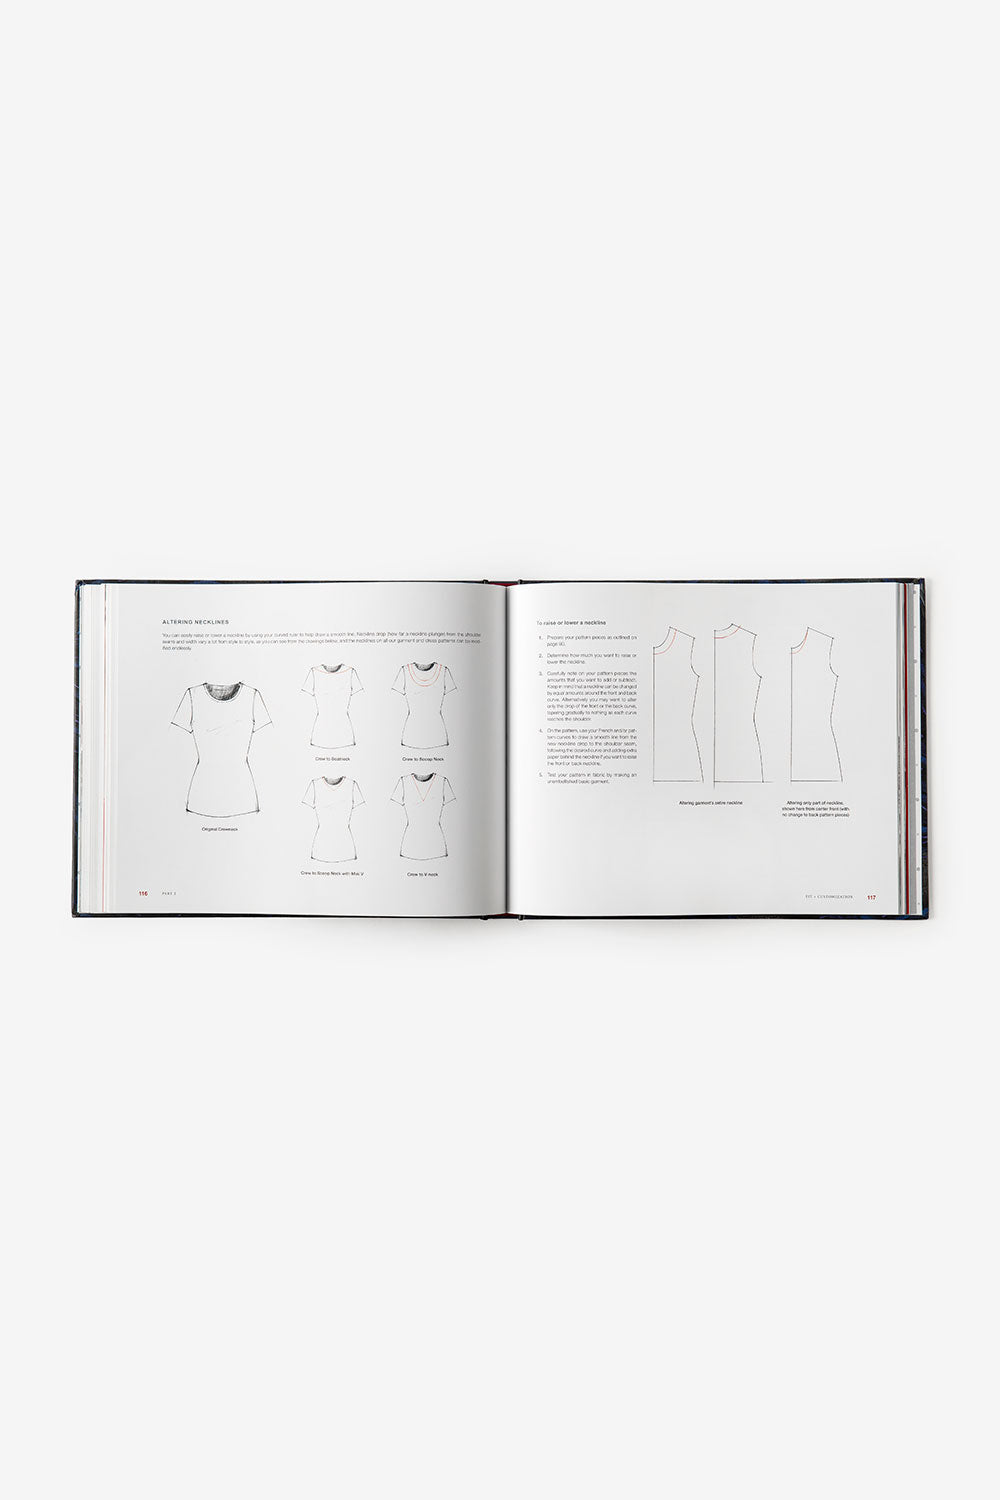 The School of Making Alabama Studio Sewing Patterns Book on Altering Necklines